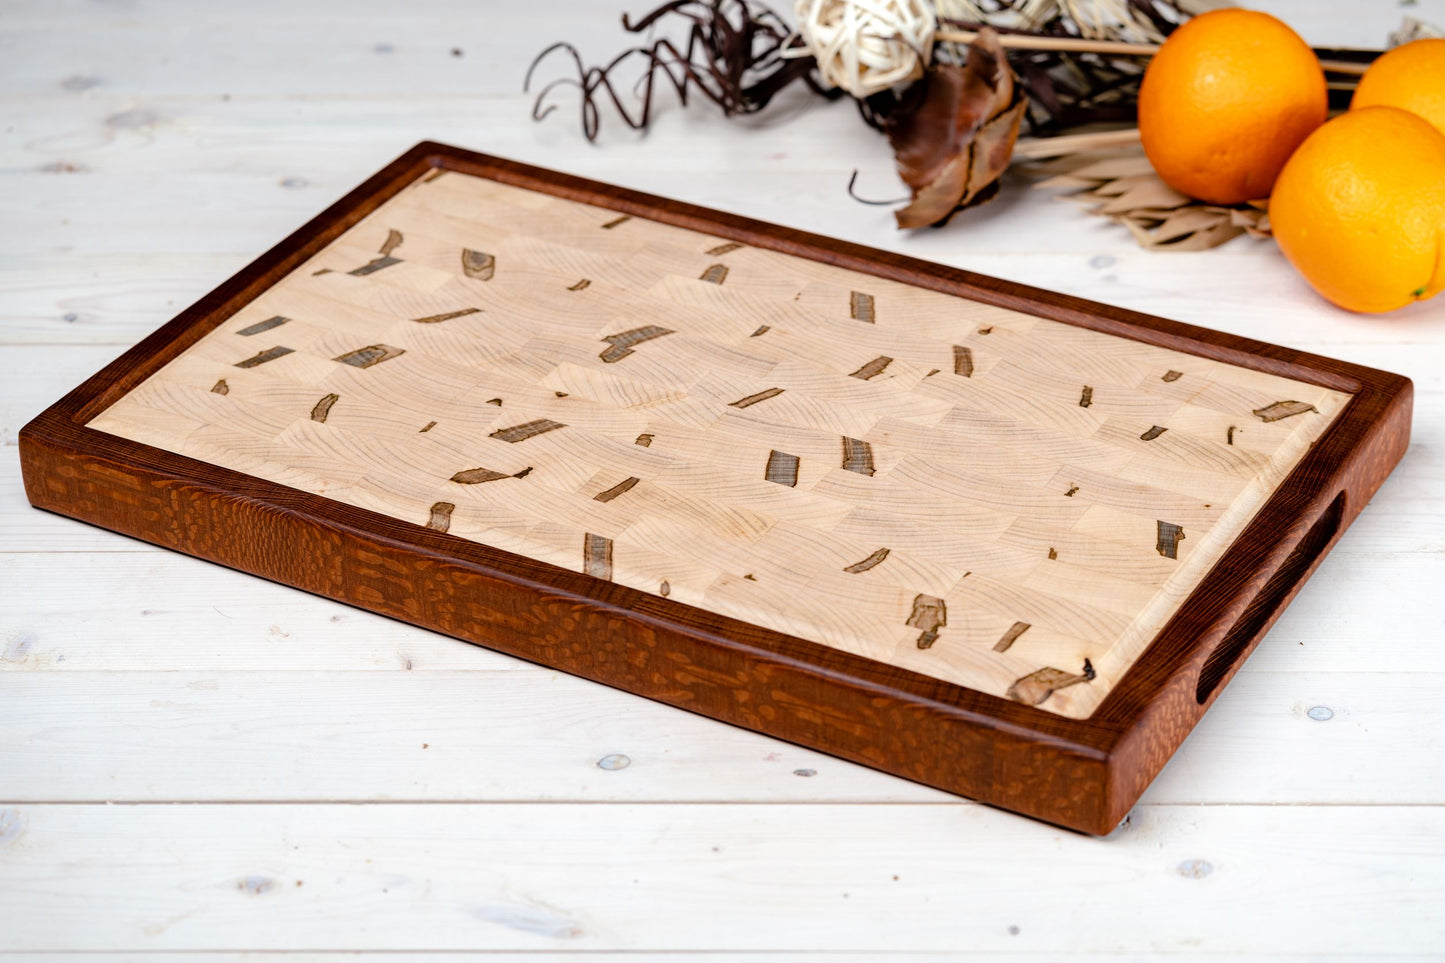 Ambrosia Maple with Lace Wood Frame Cutting Board